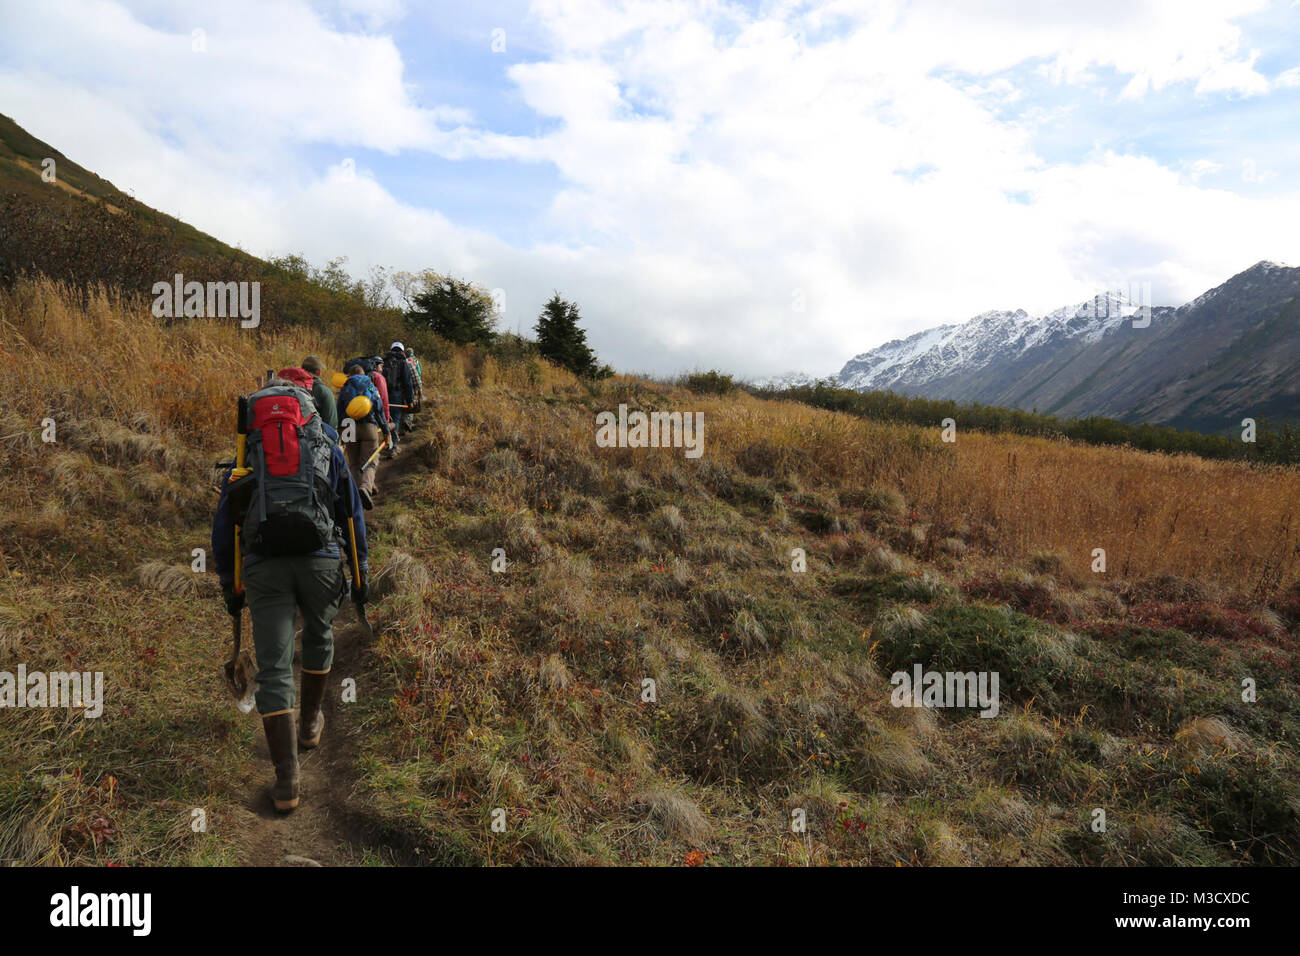 Hiking back, taking in the view.  Alaska Trail Stewards. Stock Photo